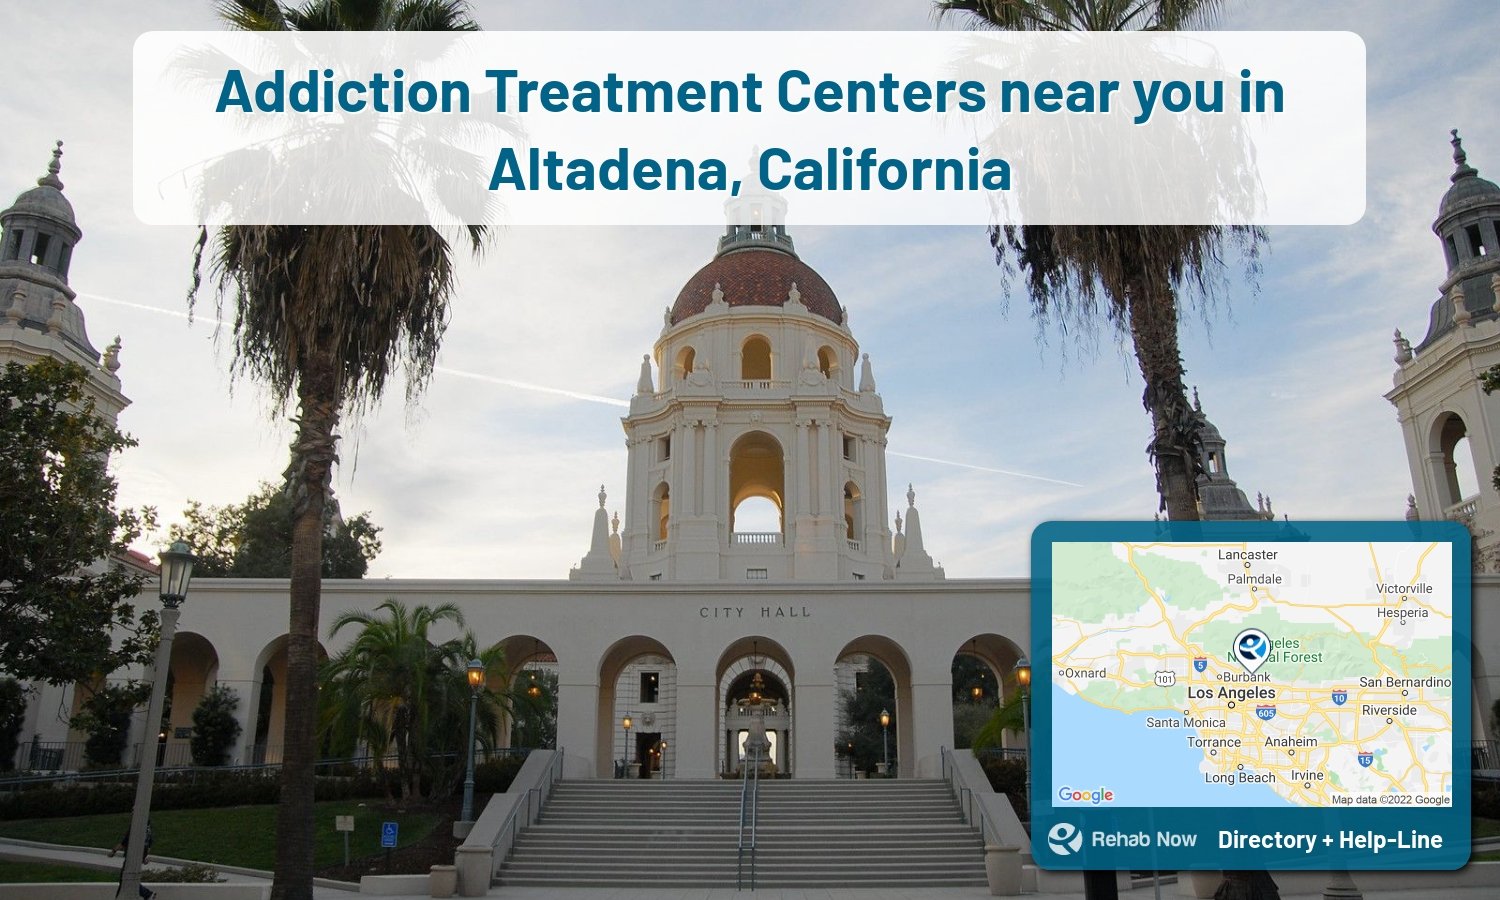 Altadena, CA Treatment Centers. Find drug rehab in Altadena, California, or detox and treatment programs. Get the right help now!